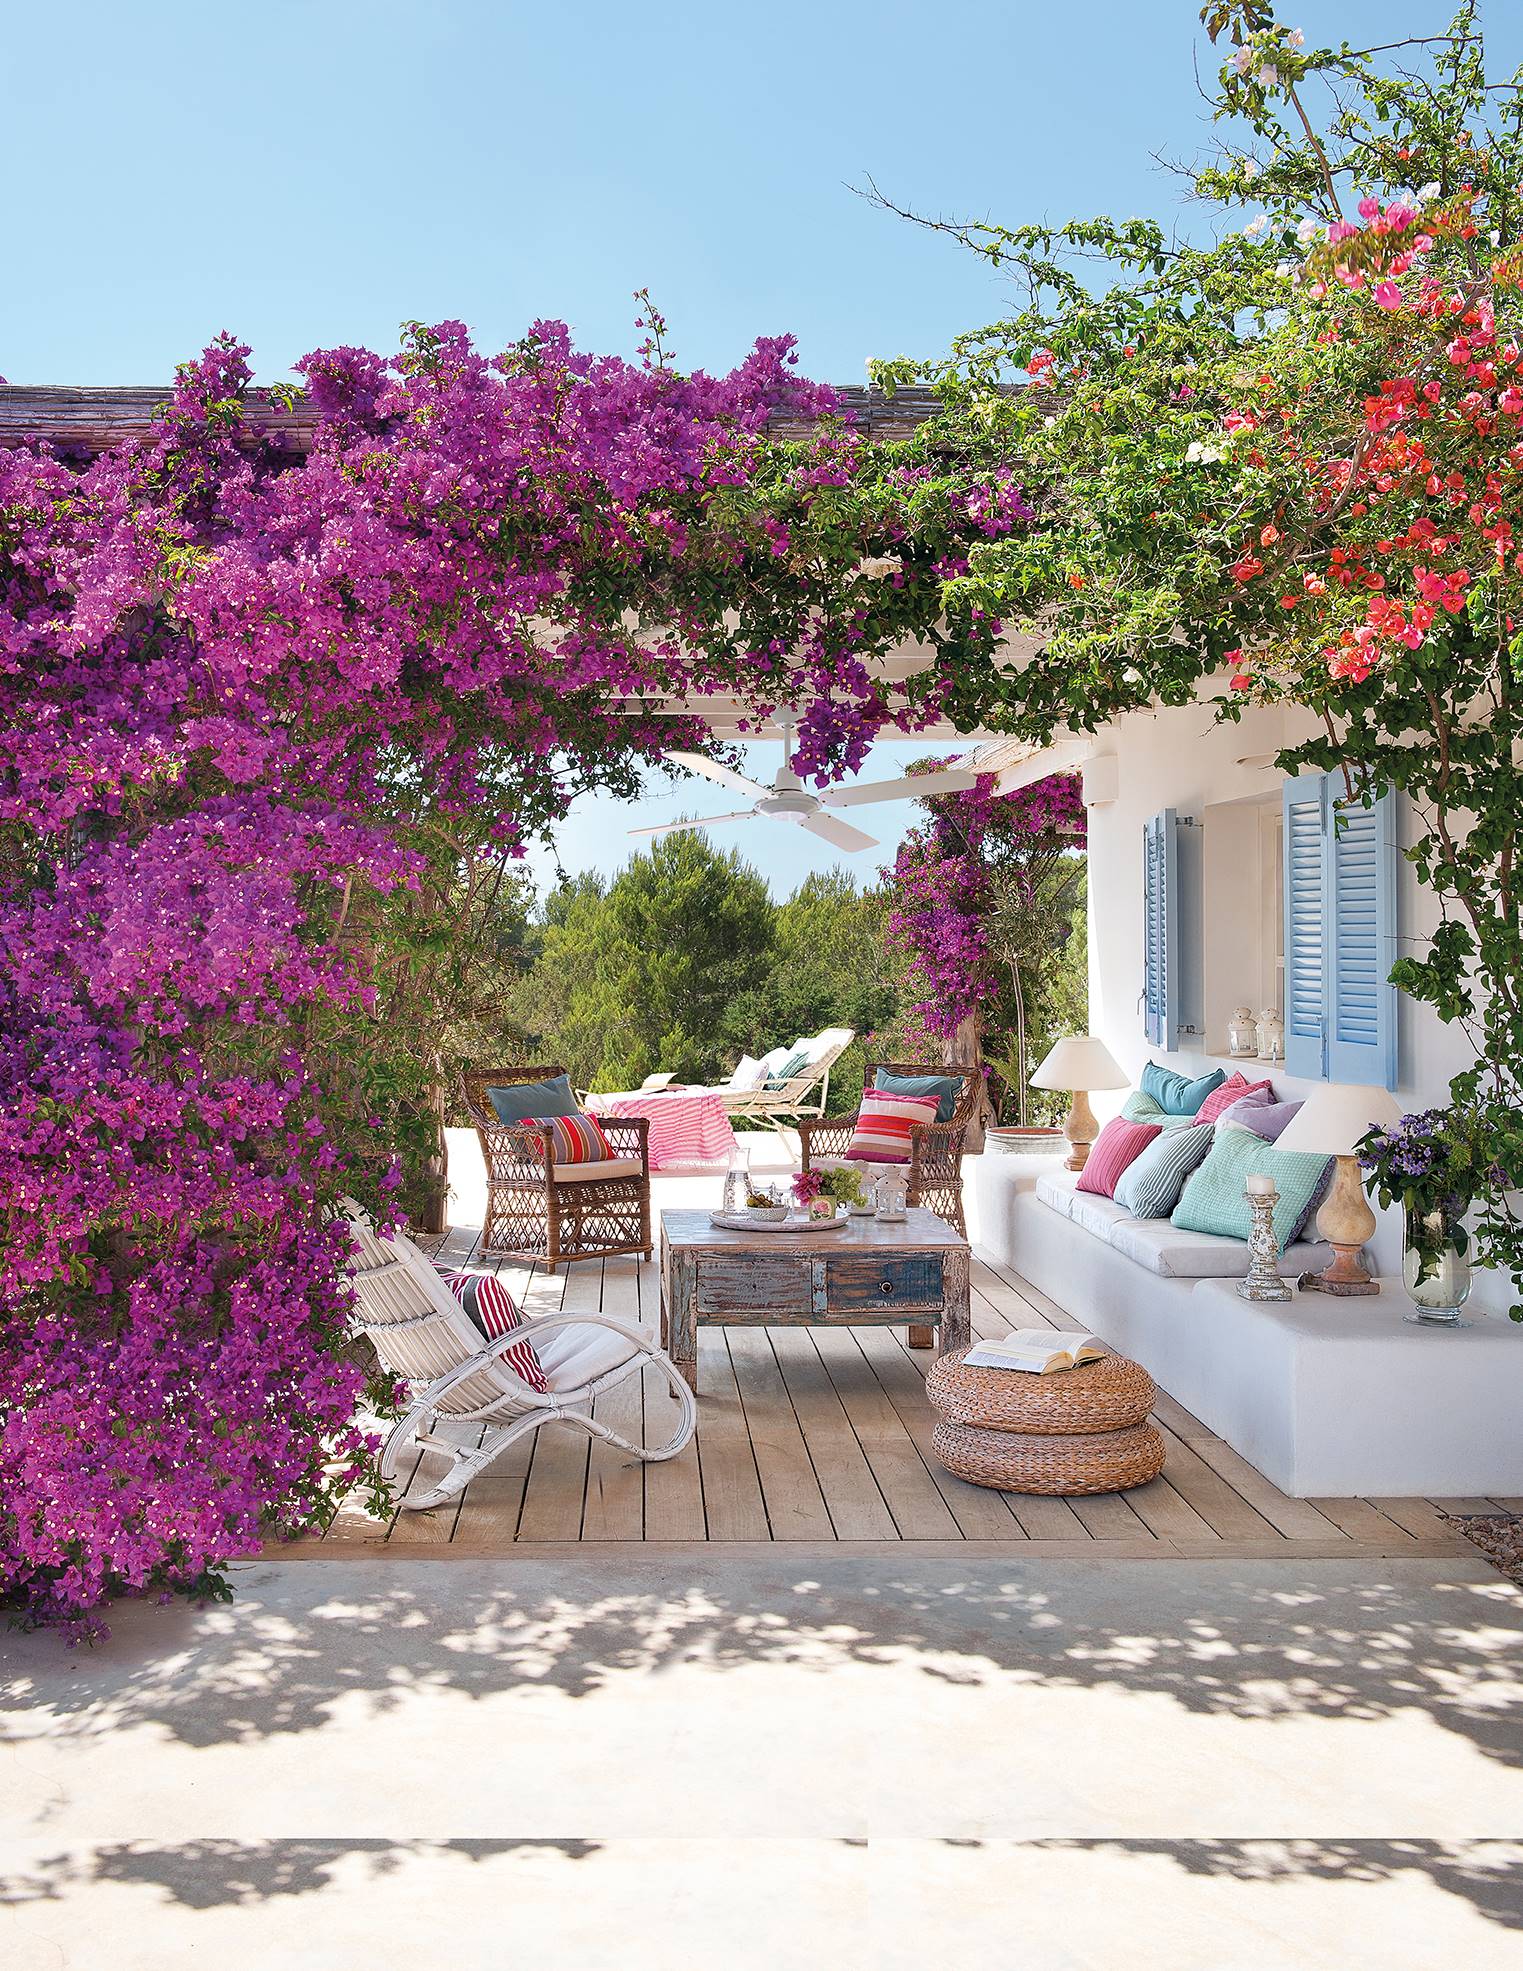 Pergola with bougainvillea in bloom and facade of the house in white.